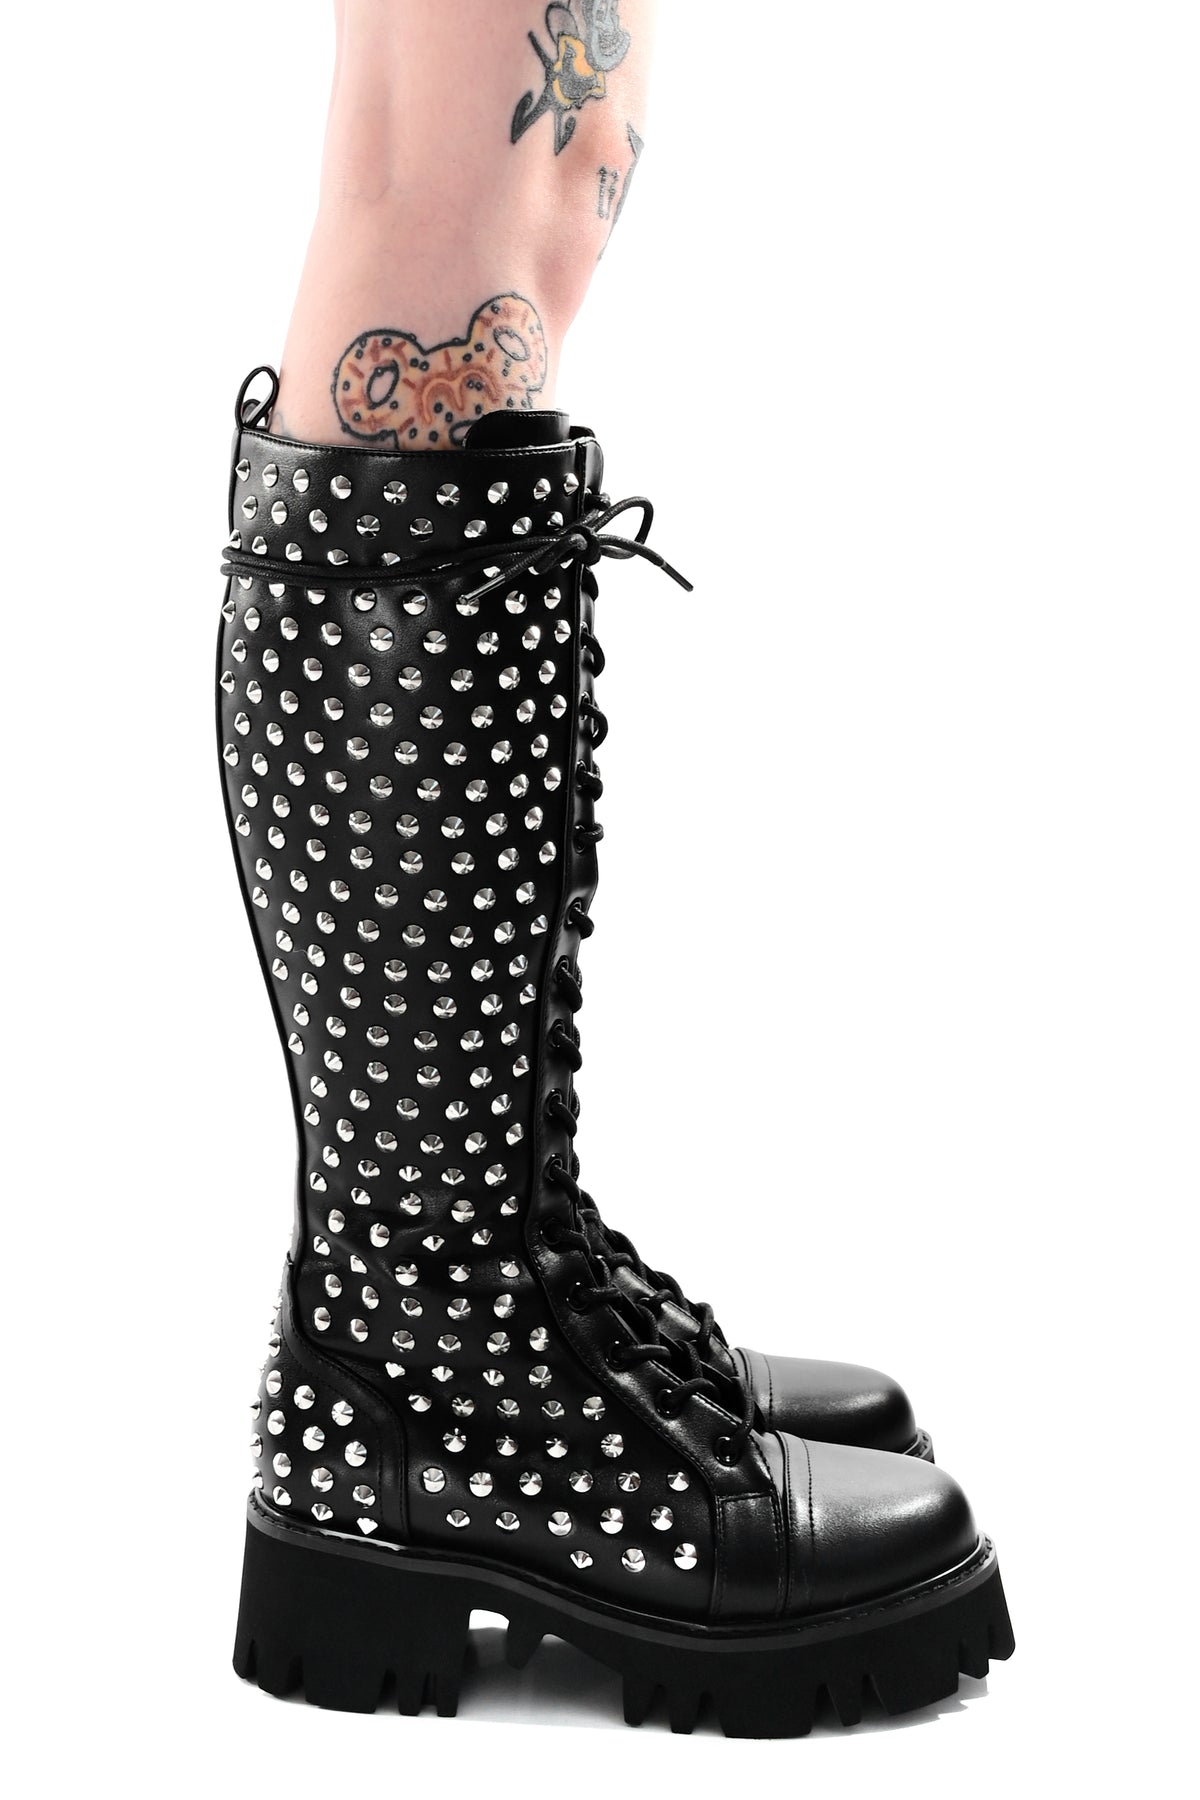 black vegan leather knee high boots covered in silver cone studs